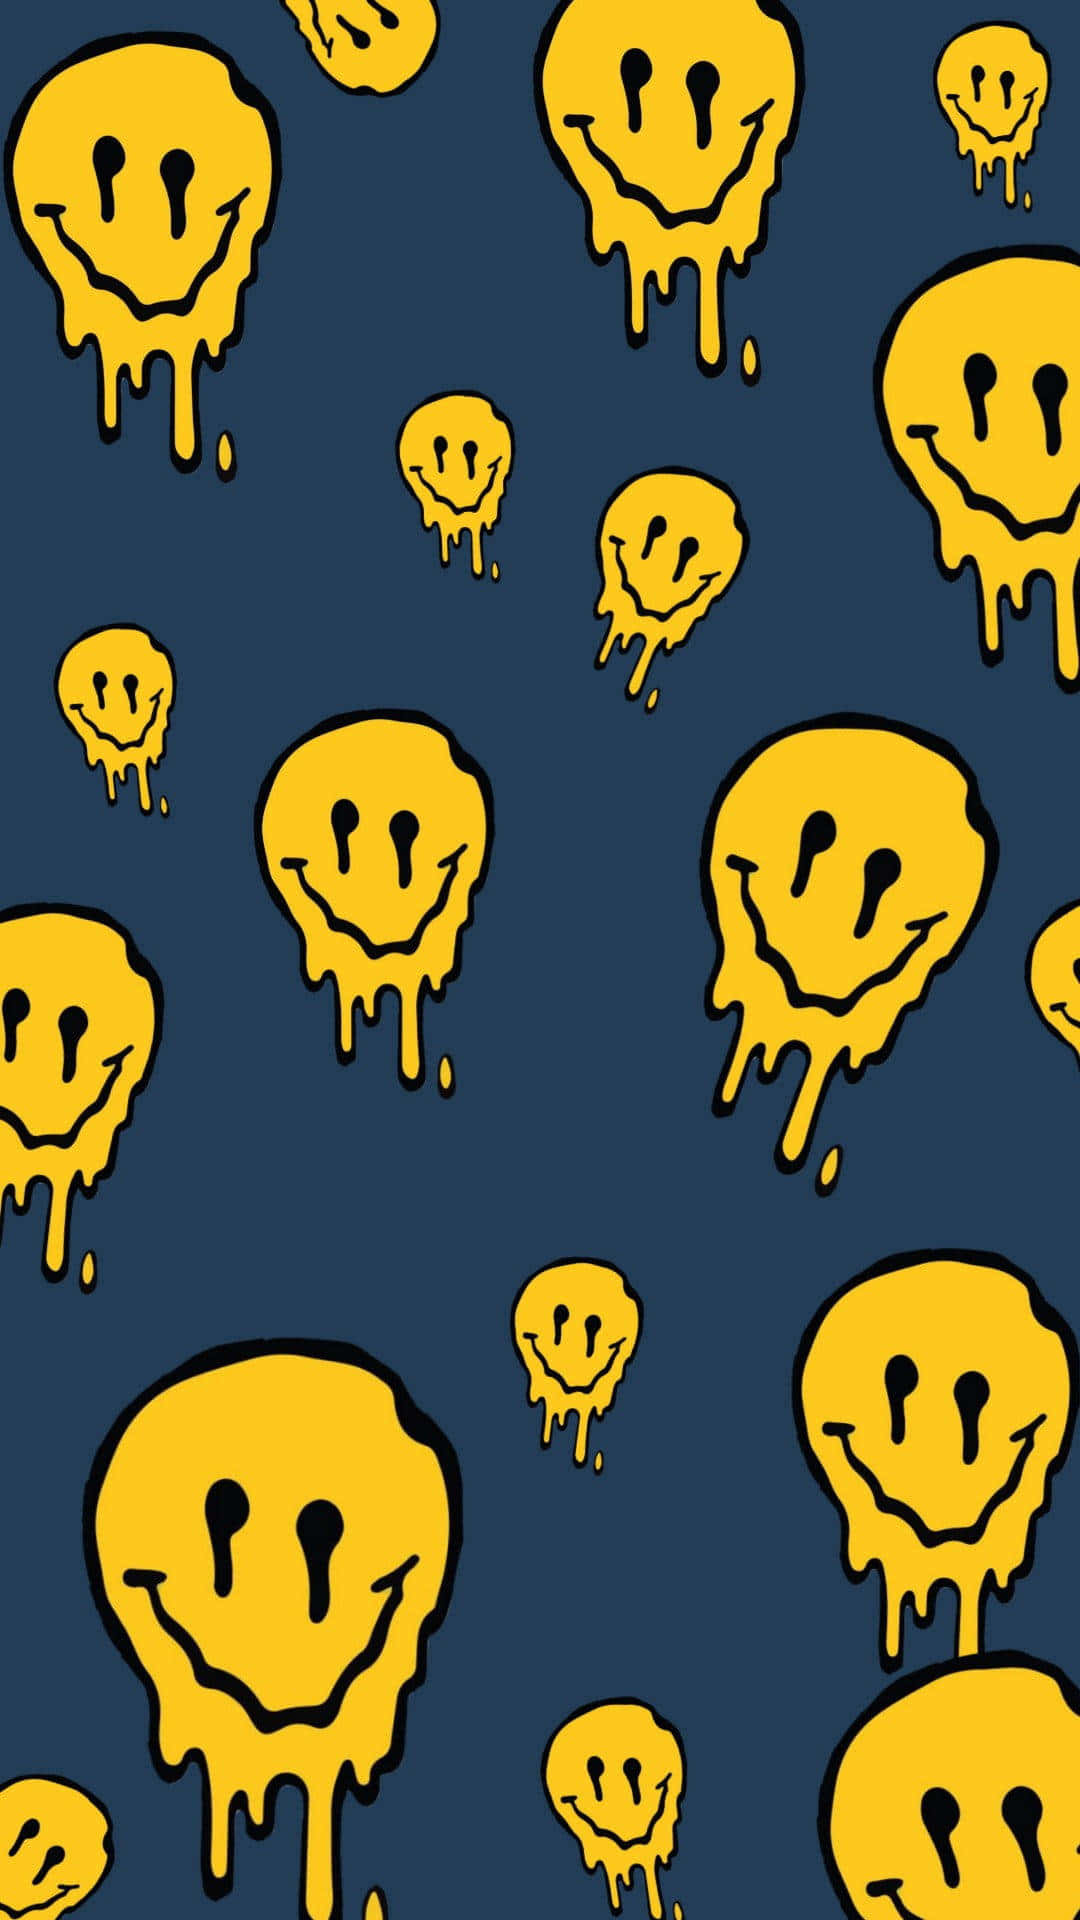 Background Smiley Face Wallpaper